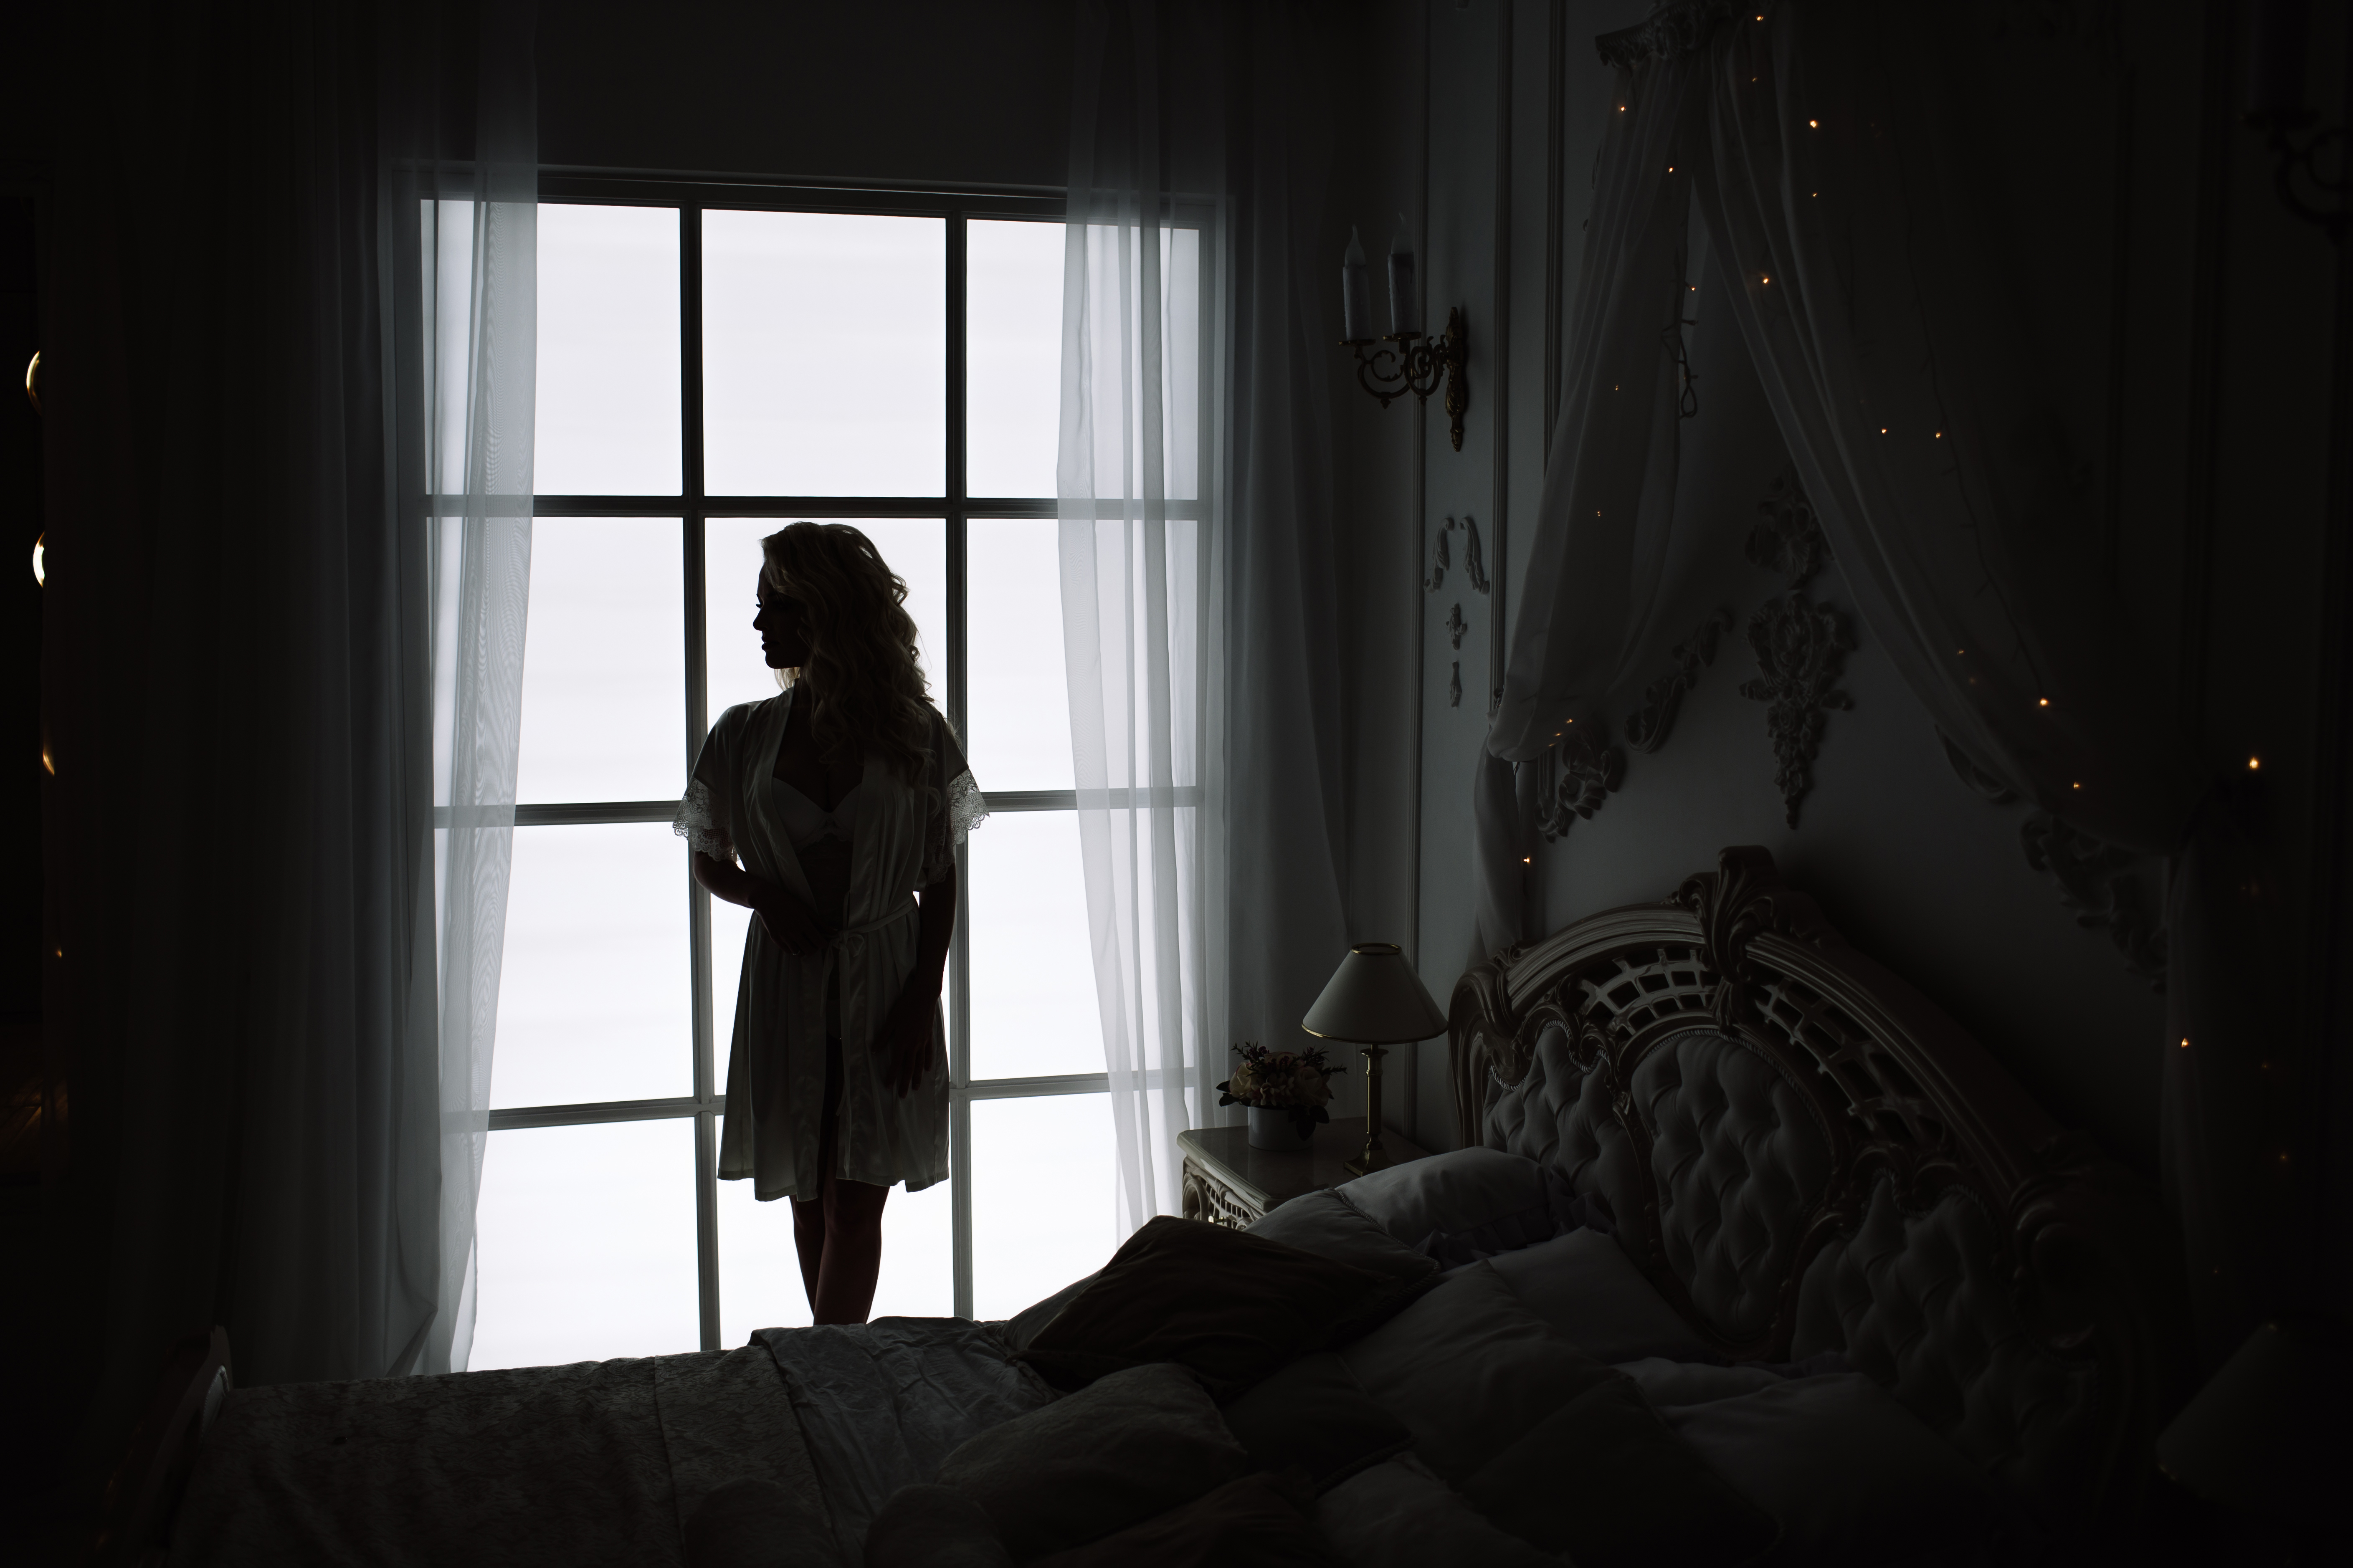 The silhouette of a woman by the window of a bedroom | Source: Shutterstock